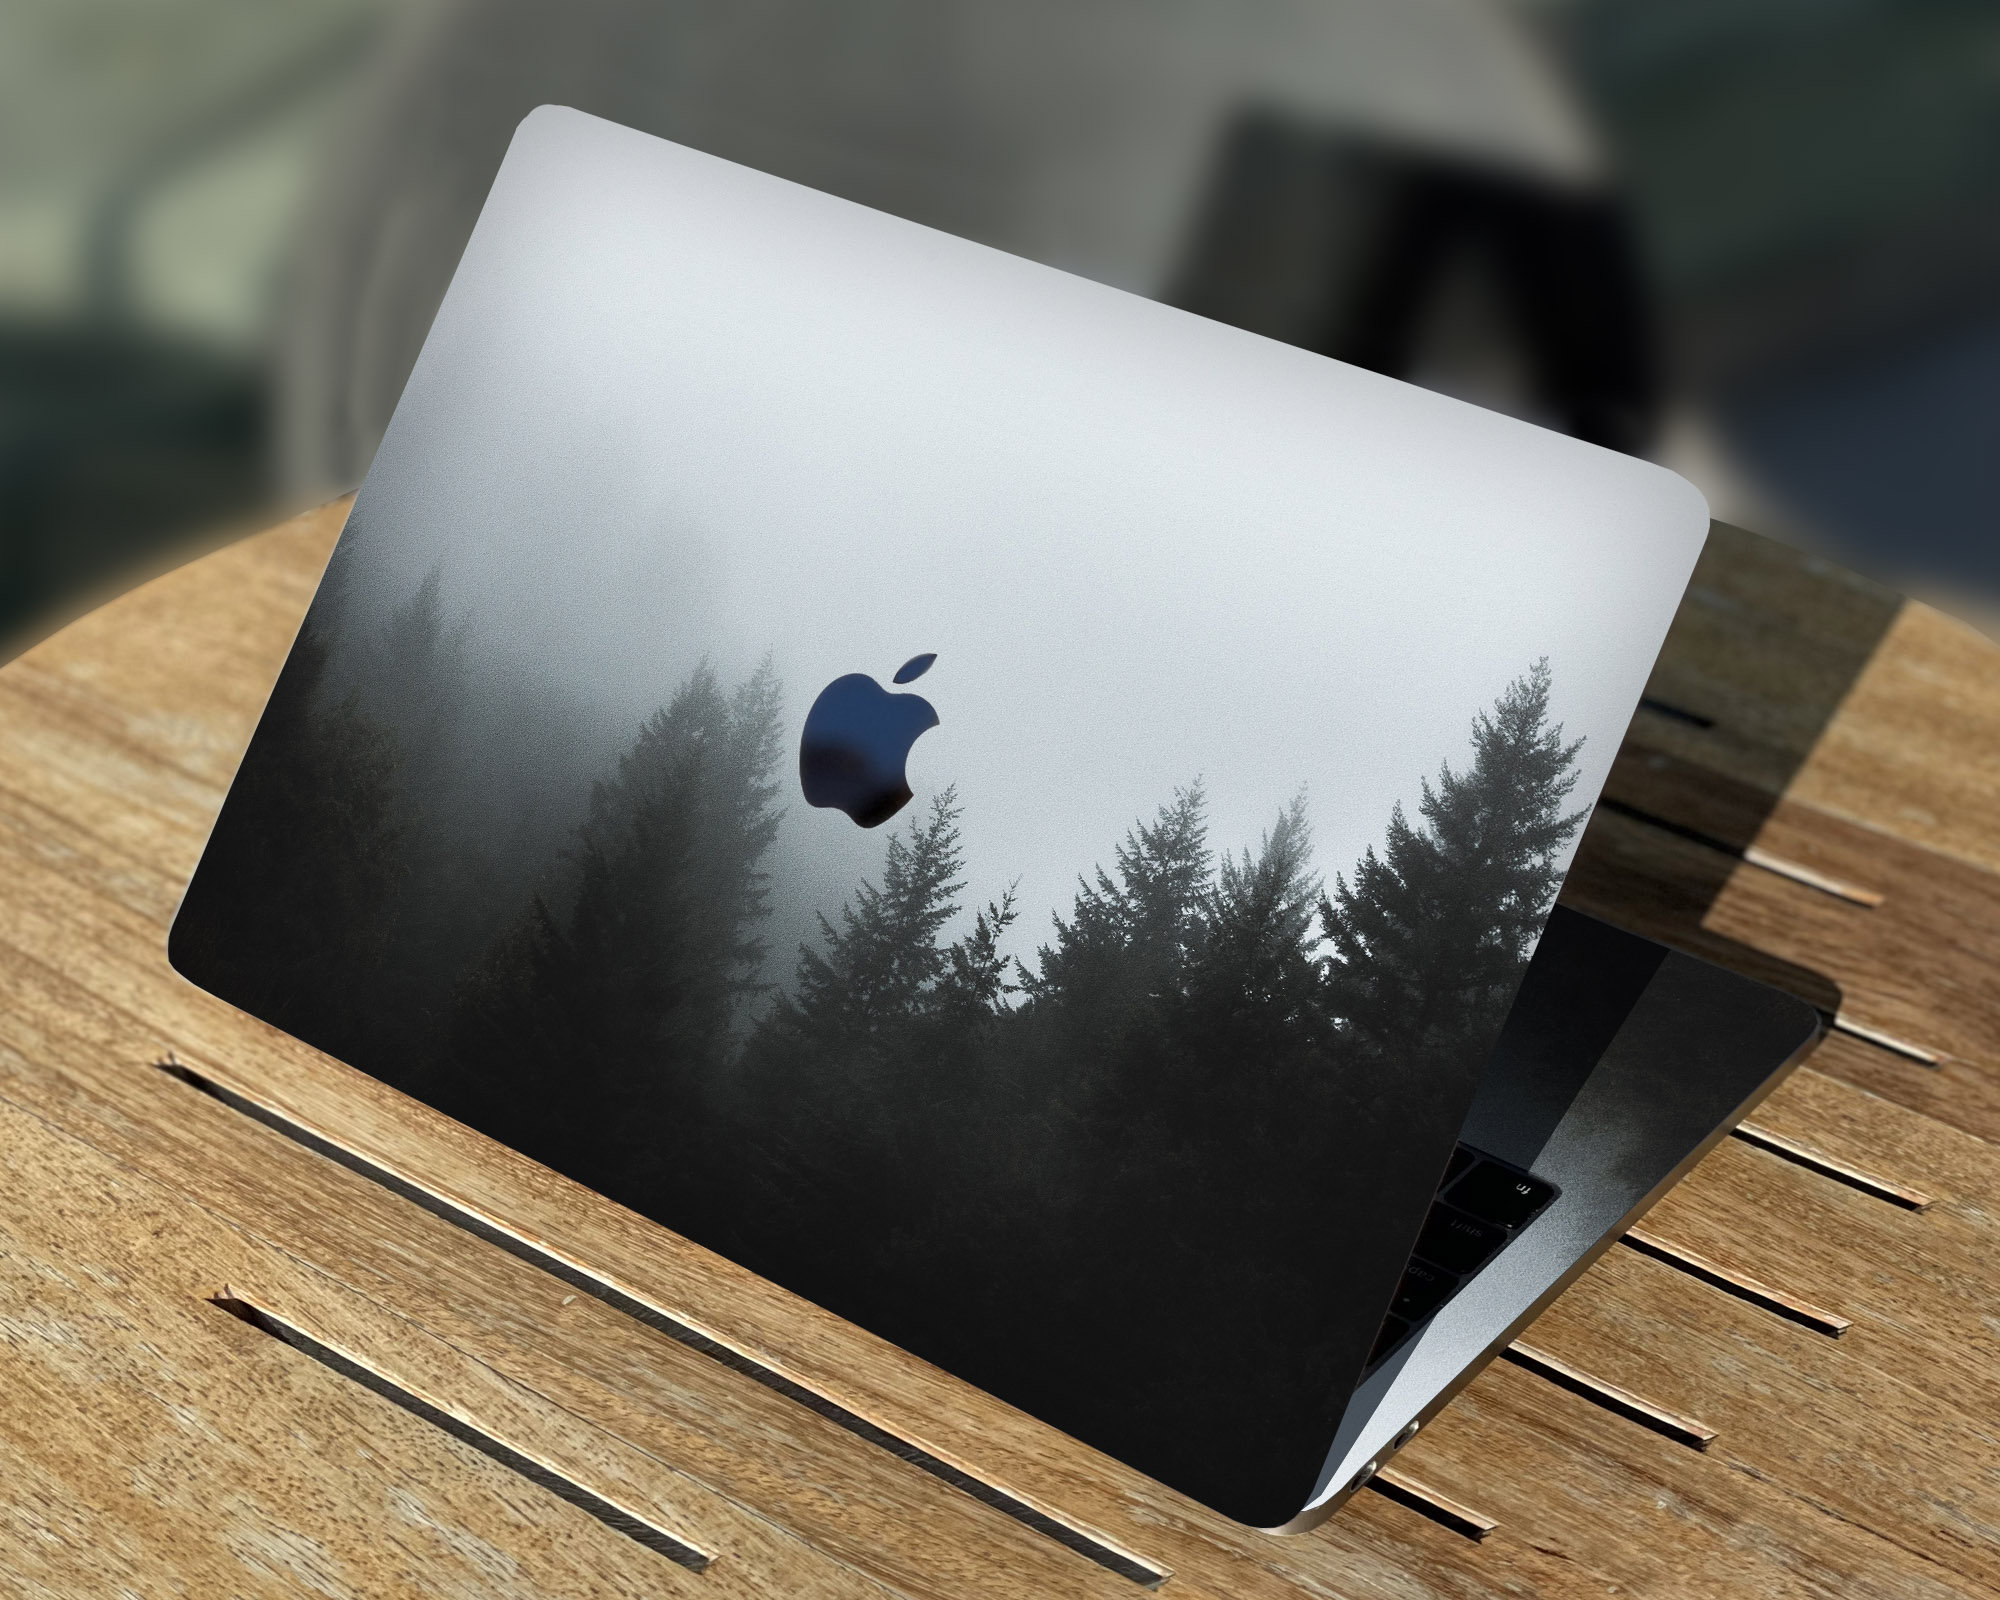 Custom Macbook Stickers  Affordable & Quality Guaranteed